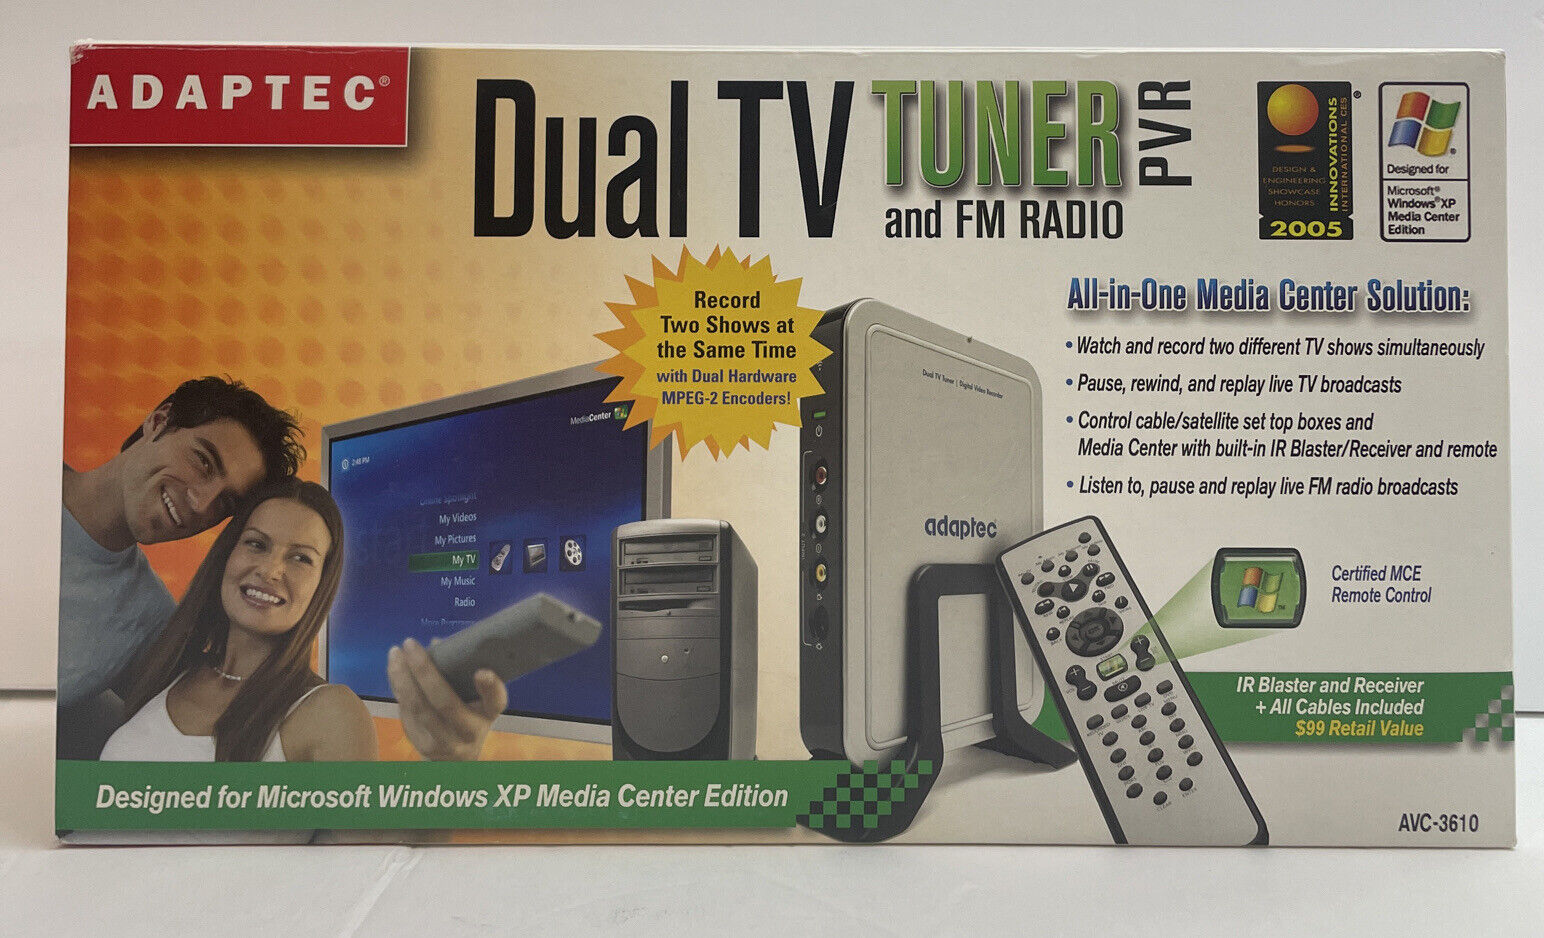 Adaptec Dual TV Tuner and FM Radio PVR AVC-3610-All-in-One Media Center Solution